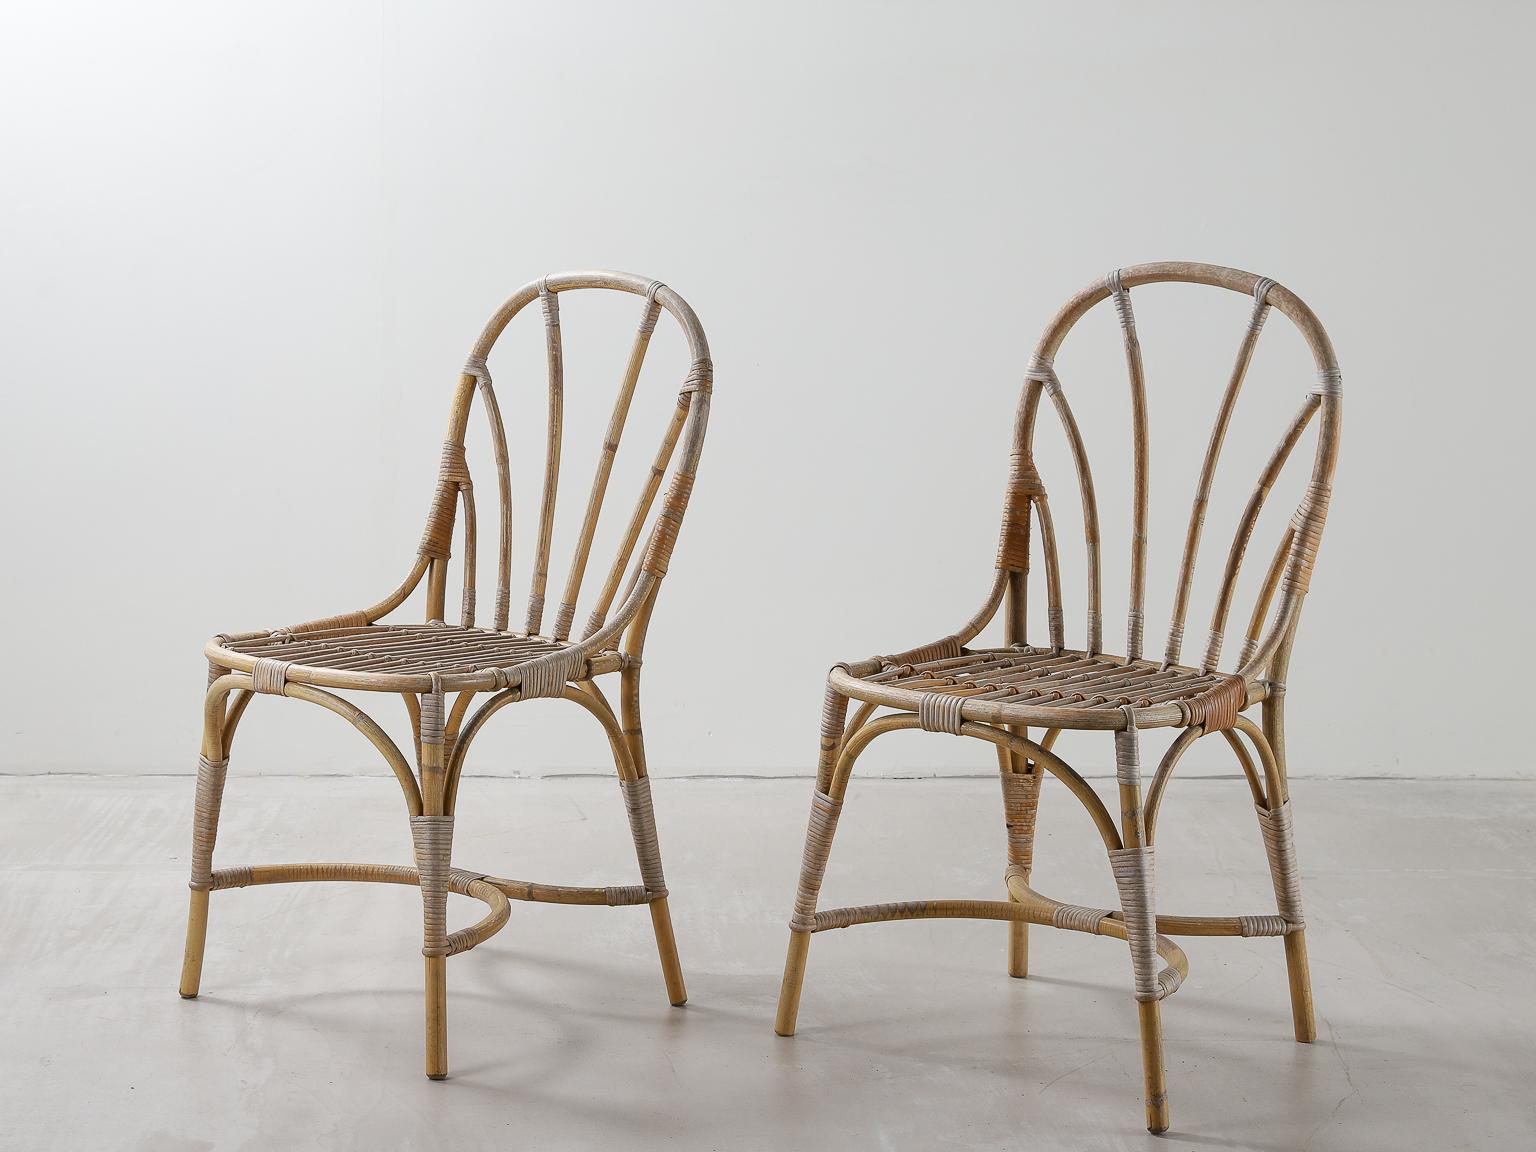 A pair of Bamboo & Rattan Chairs designed in 1947 by Josef Frank in Sweden. 

The Austrian born architect is considered to be one of the most important figures in Swedish design. Frank represented a freer, more artistic style ideal and he developed